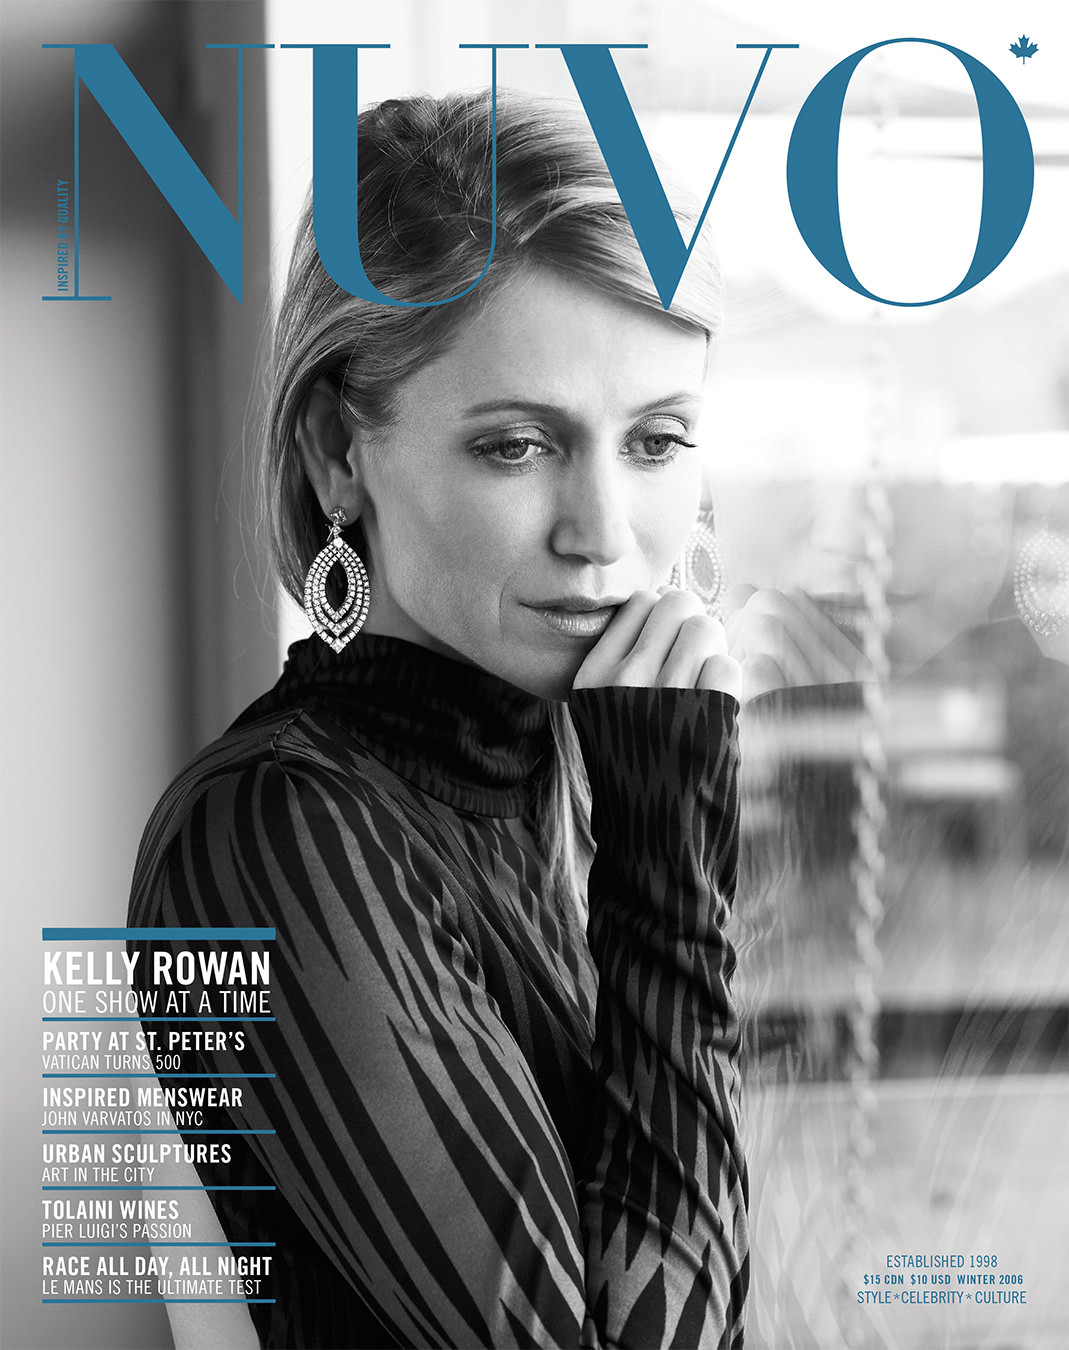 NUVO Magazine Winter 2006 Cover featuring Kelly Rowan